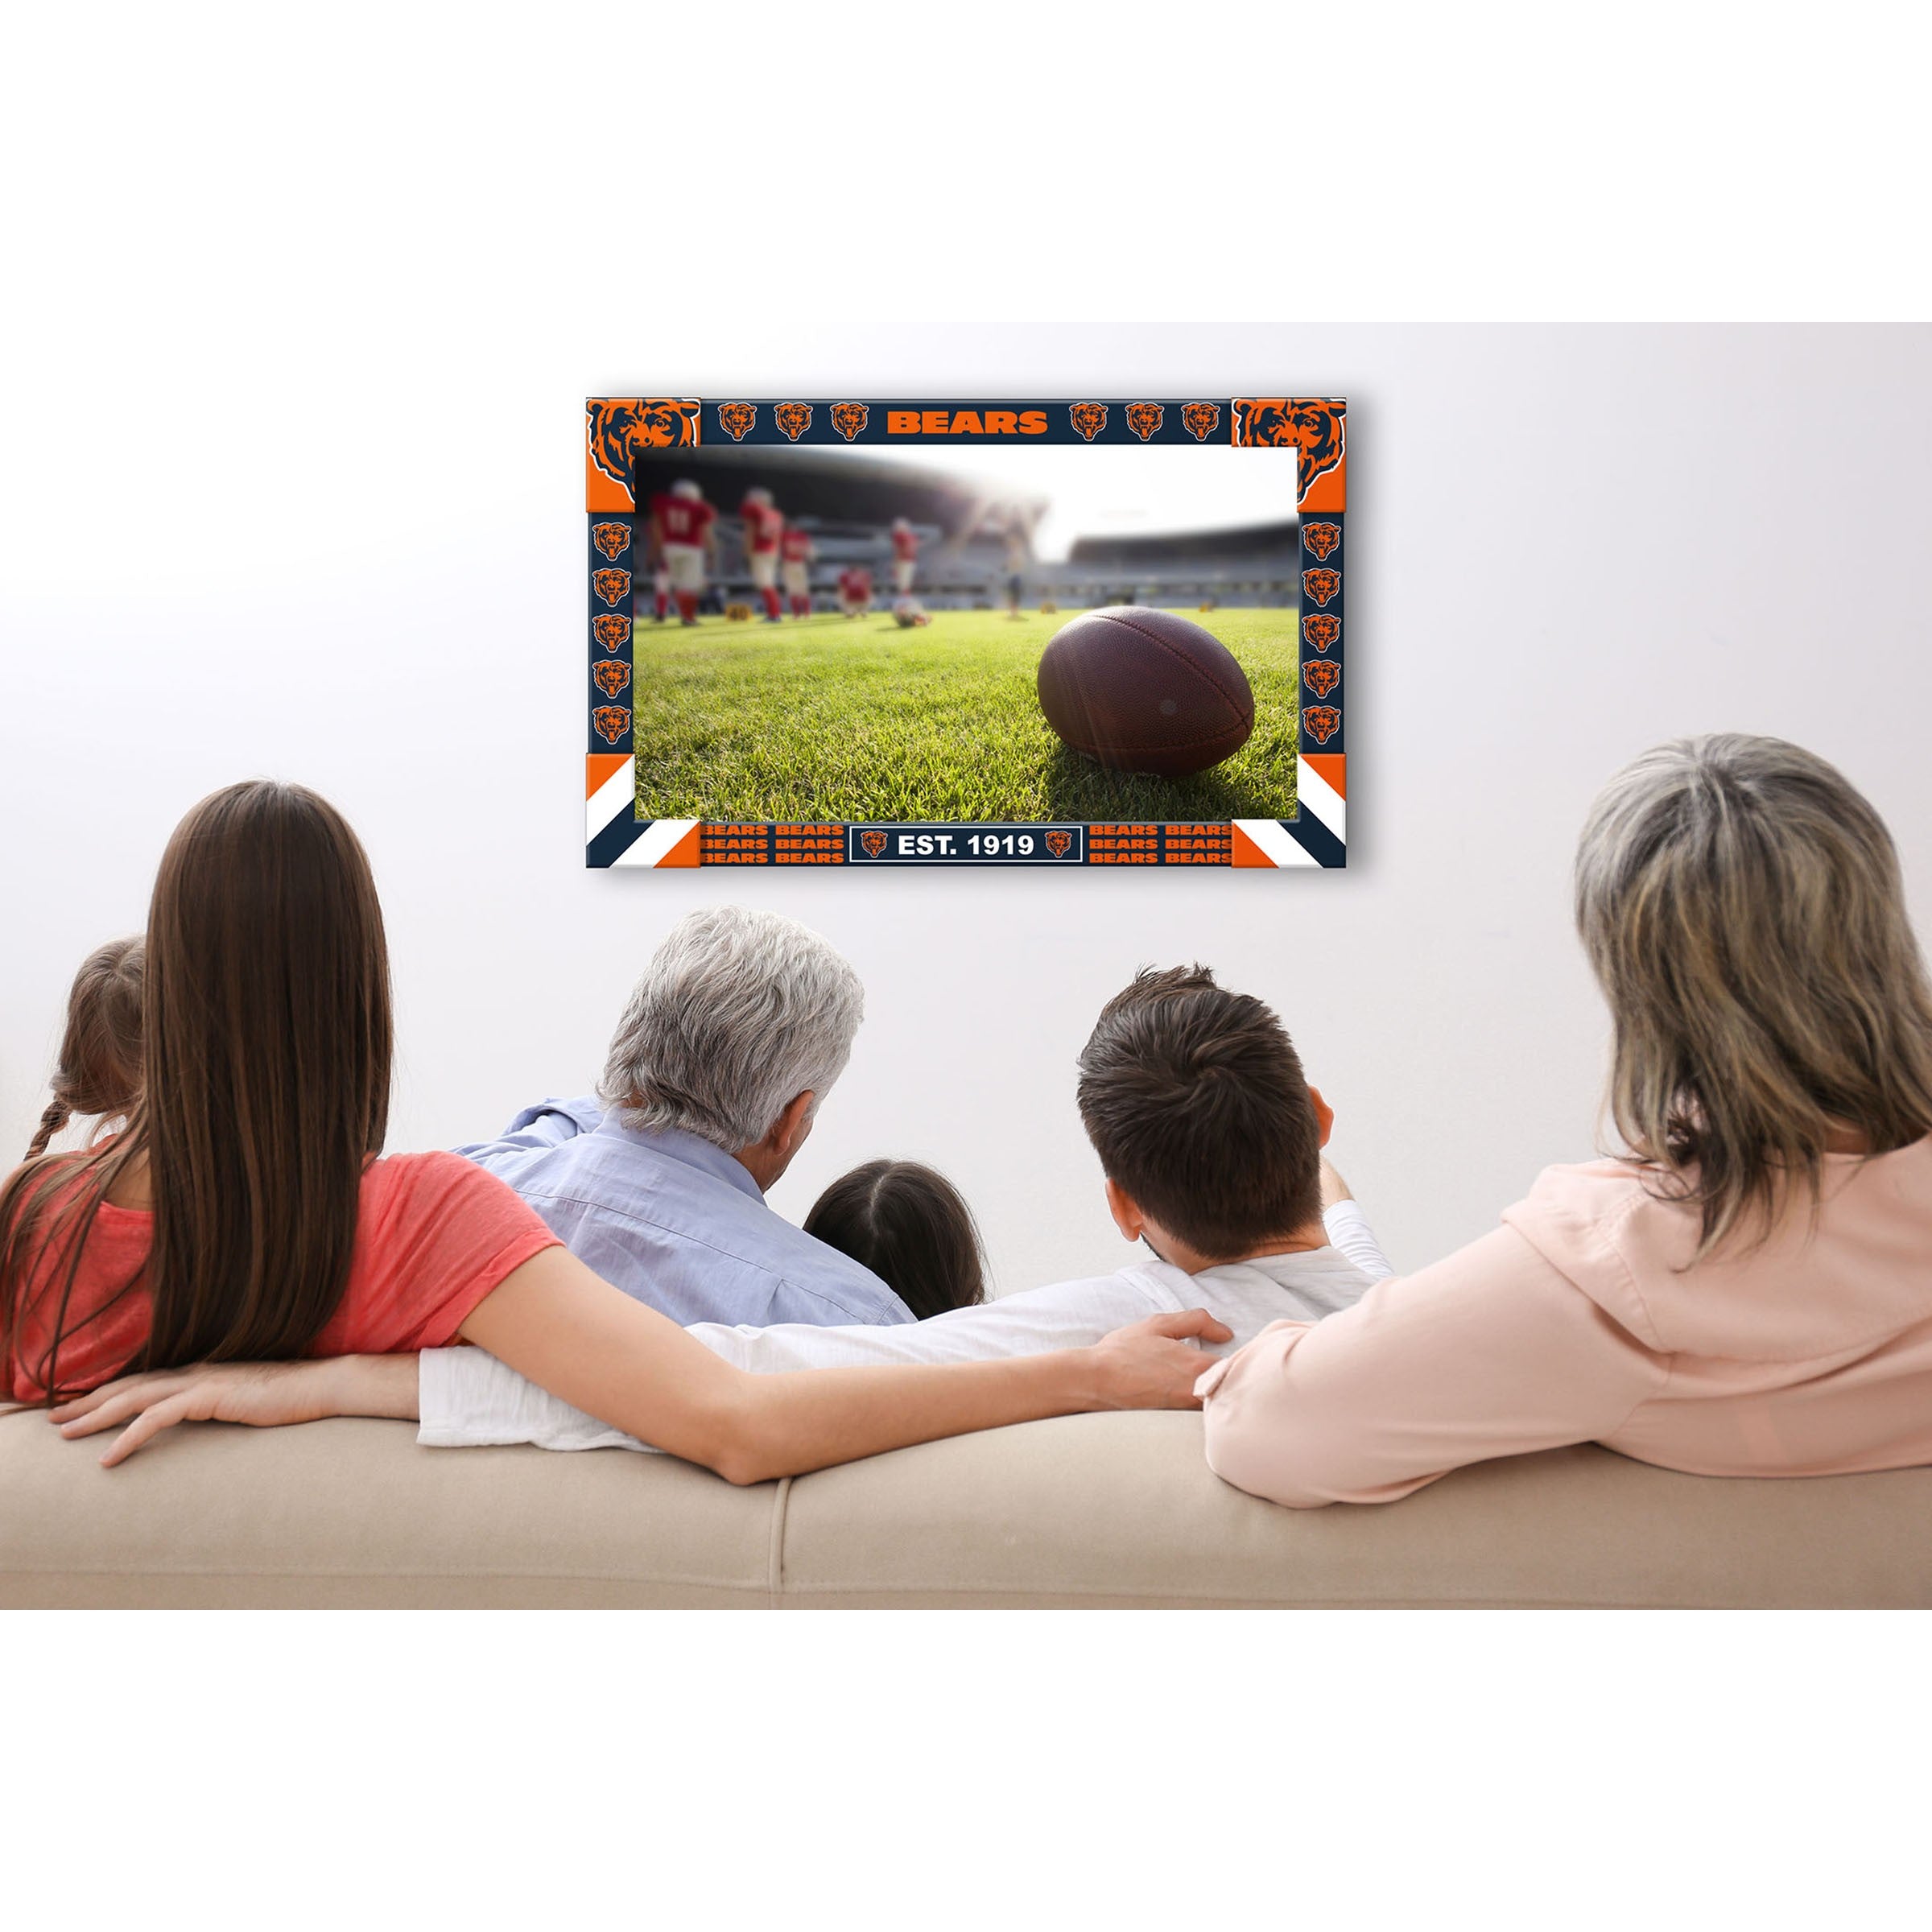 Imperial Chicago Bears Big Game TV Frame